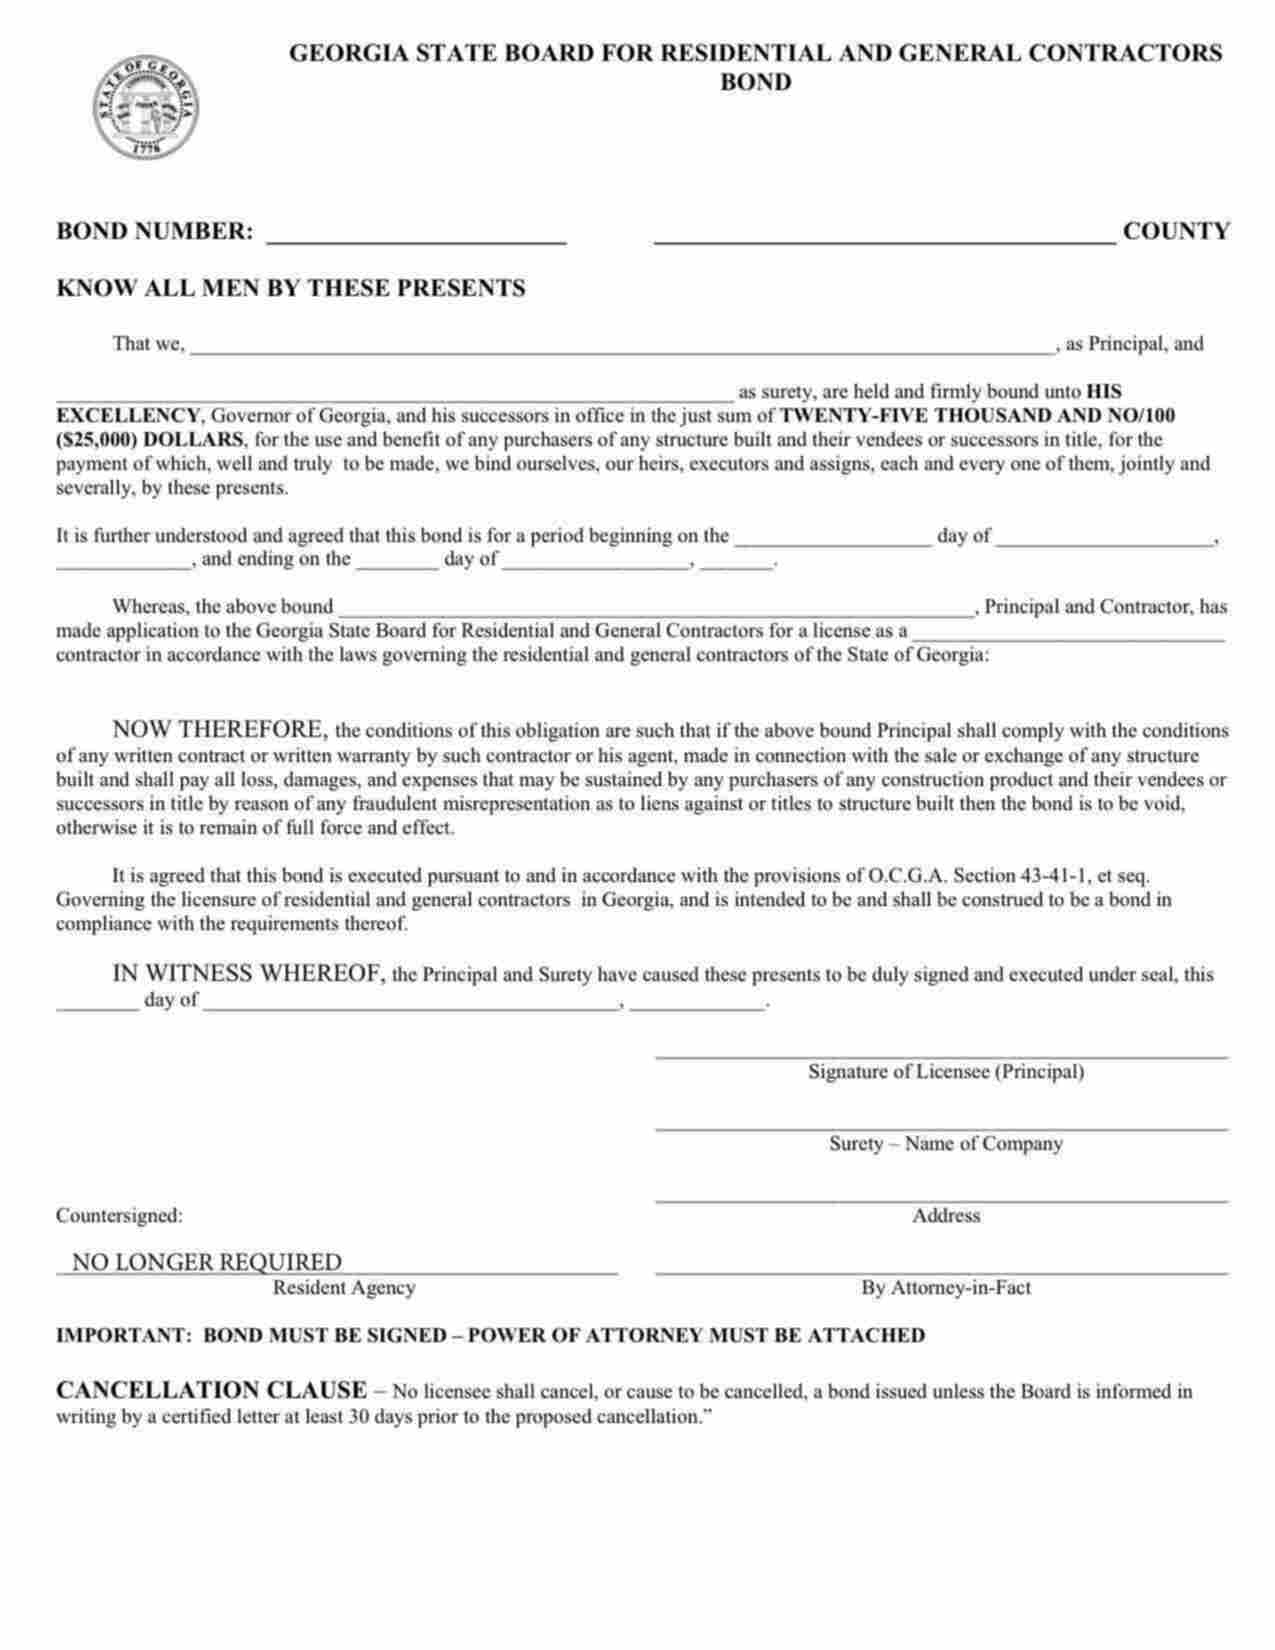 Georgia General Contractor Limited Bond Form